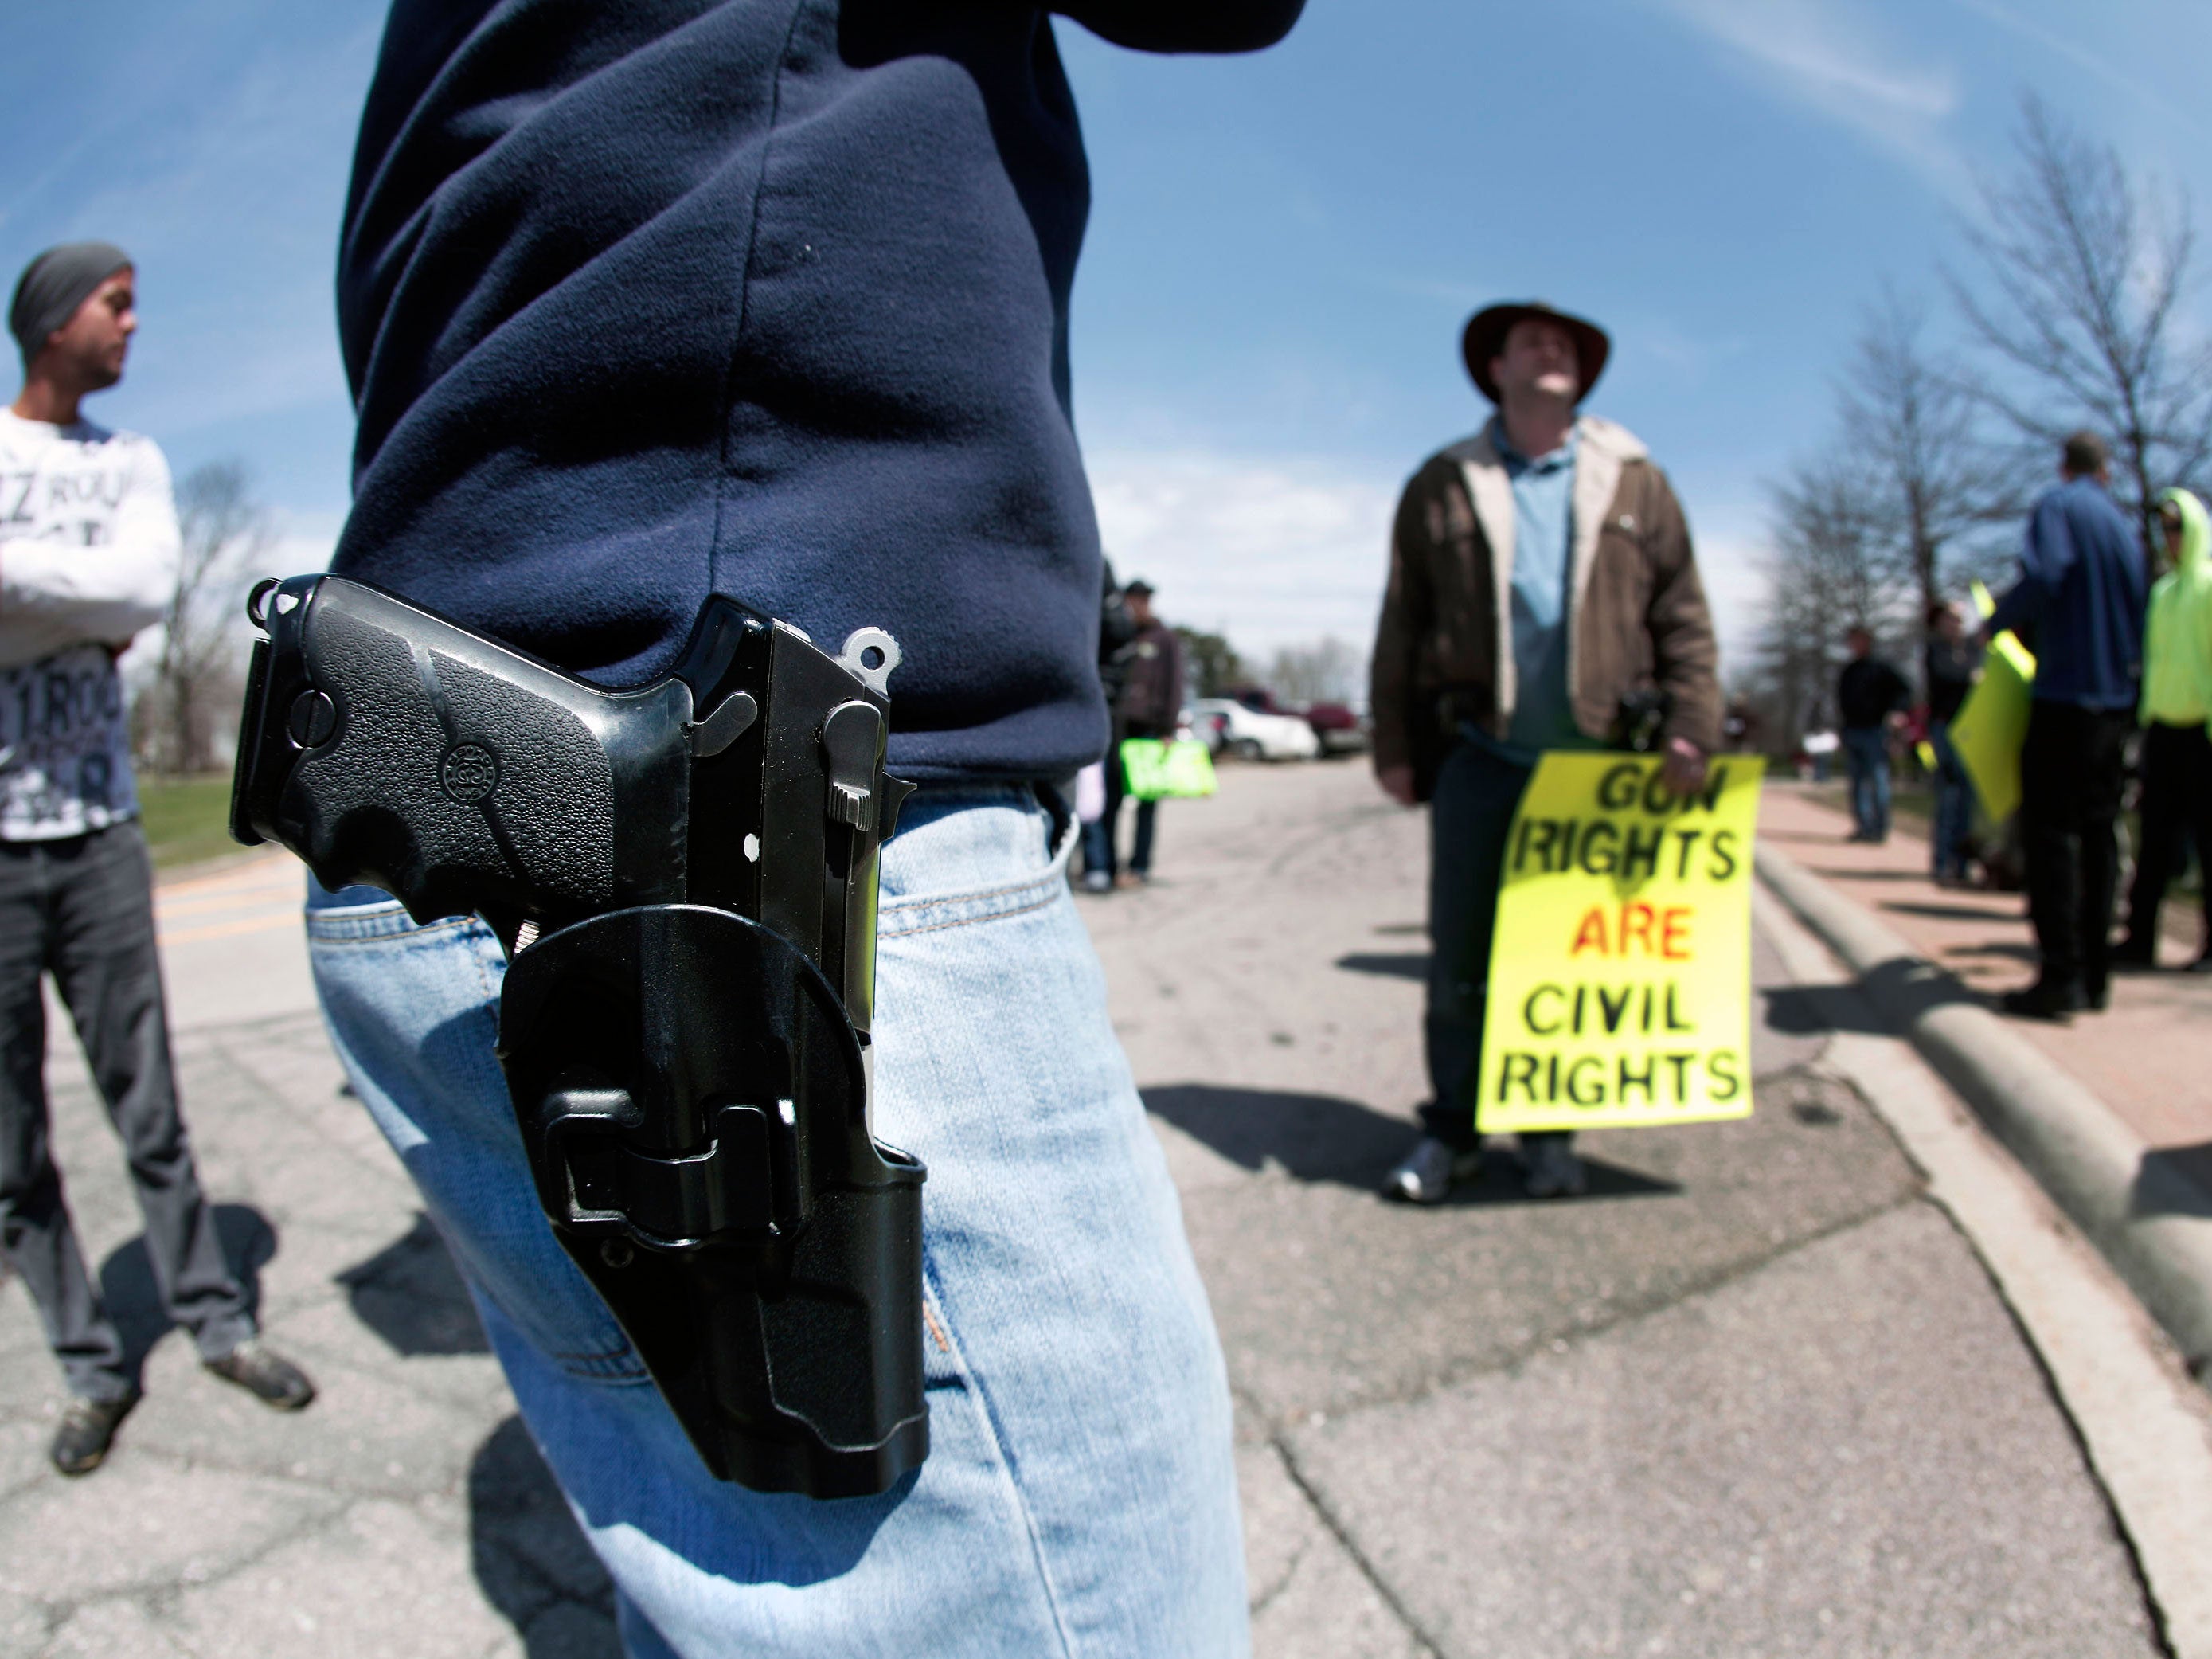 A supporter of Michigan's Open Carry law attends a rally and march April 27, 2014 in Romulus, Michigan.